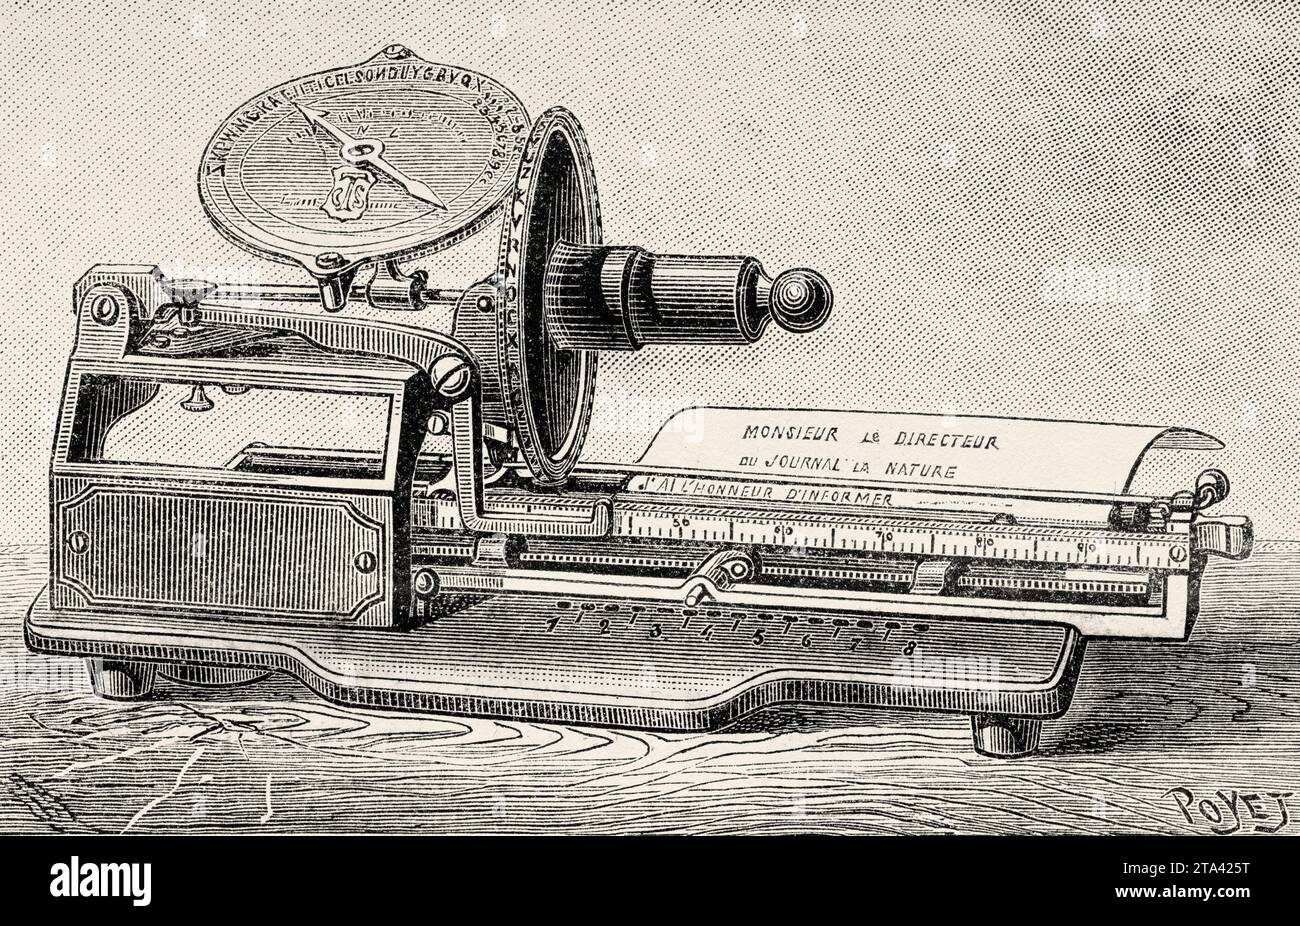 The Columbia typewriter by the legendary typewriter pioneer Charles Spiro. Old illustration by Louis Poyet (1846-1913) from La Nature 1887 Stock Photo